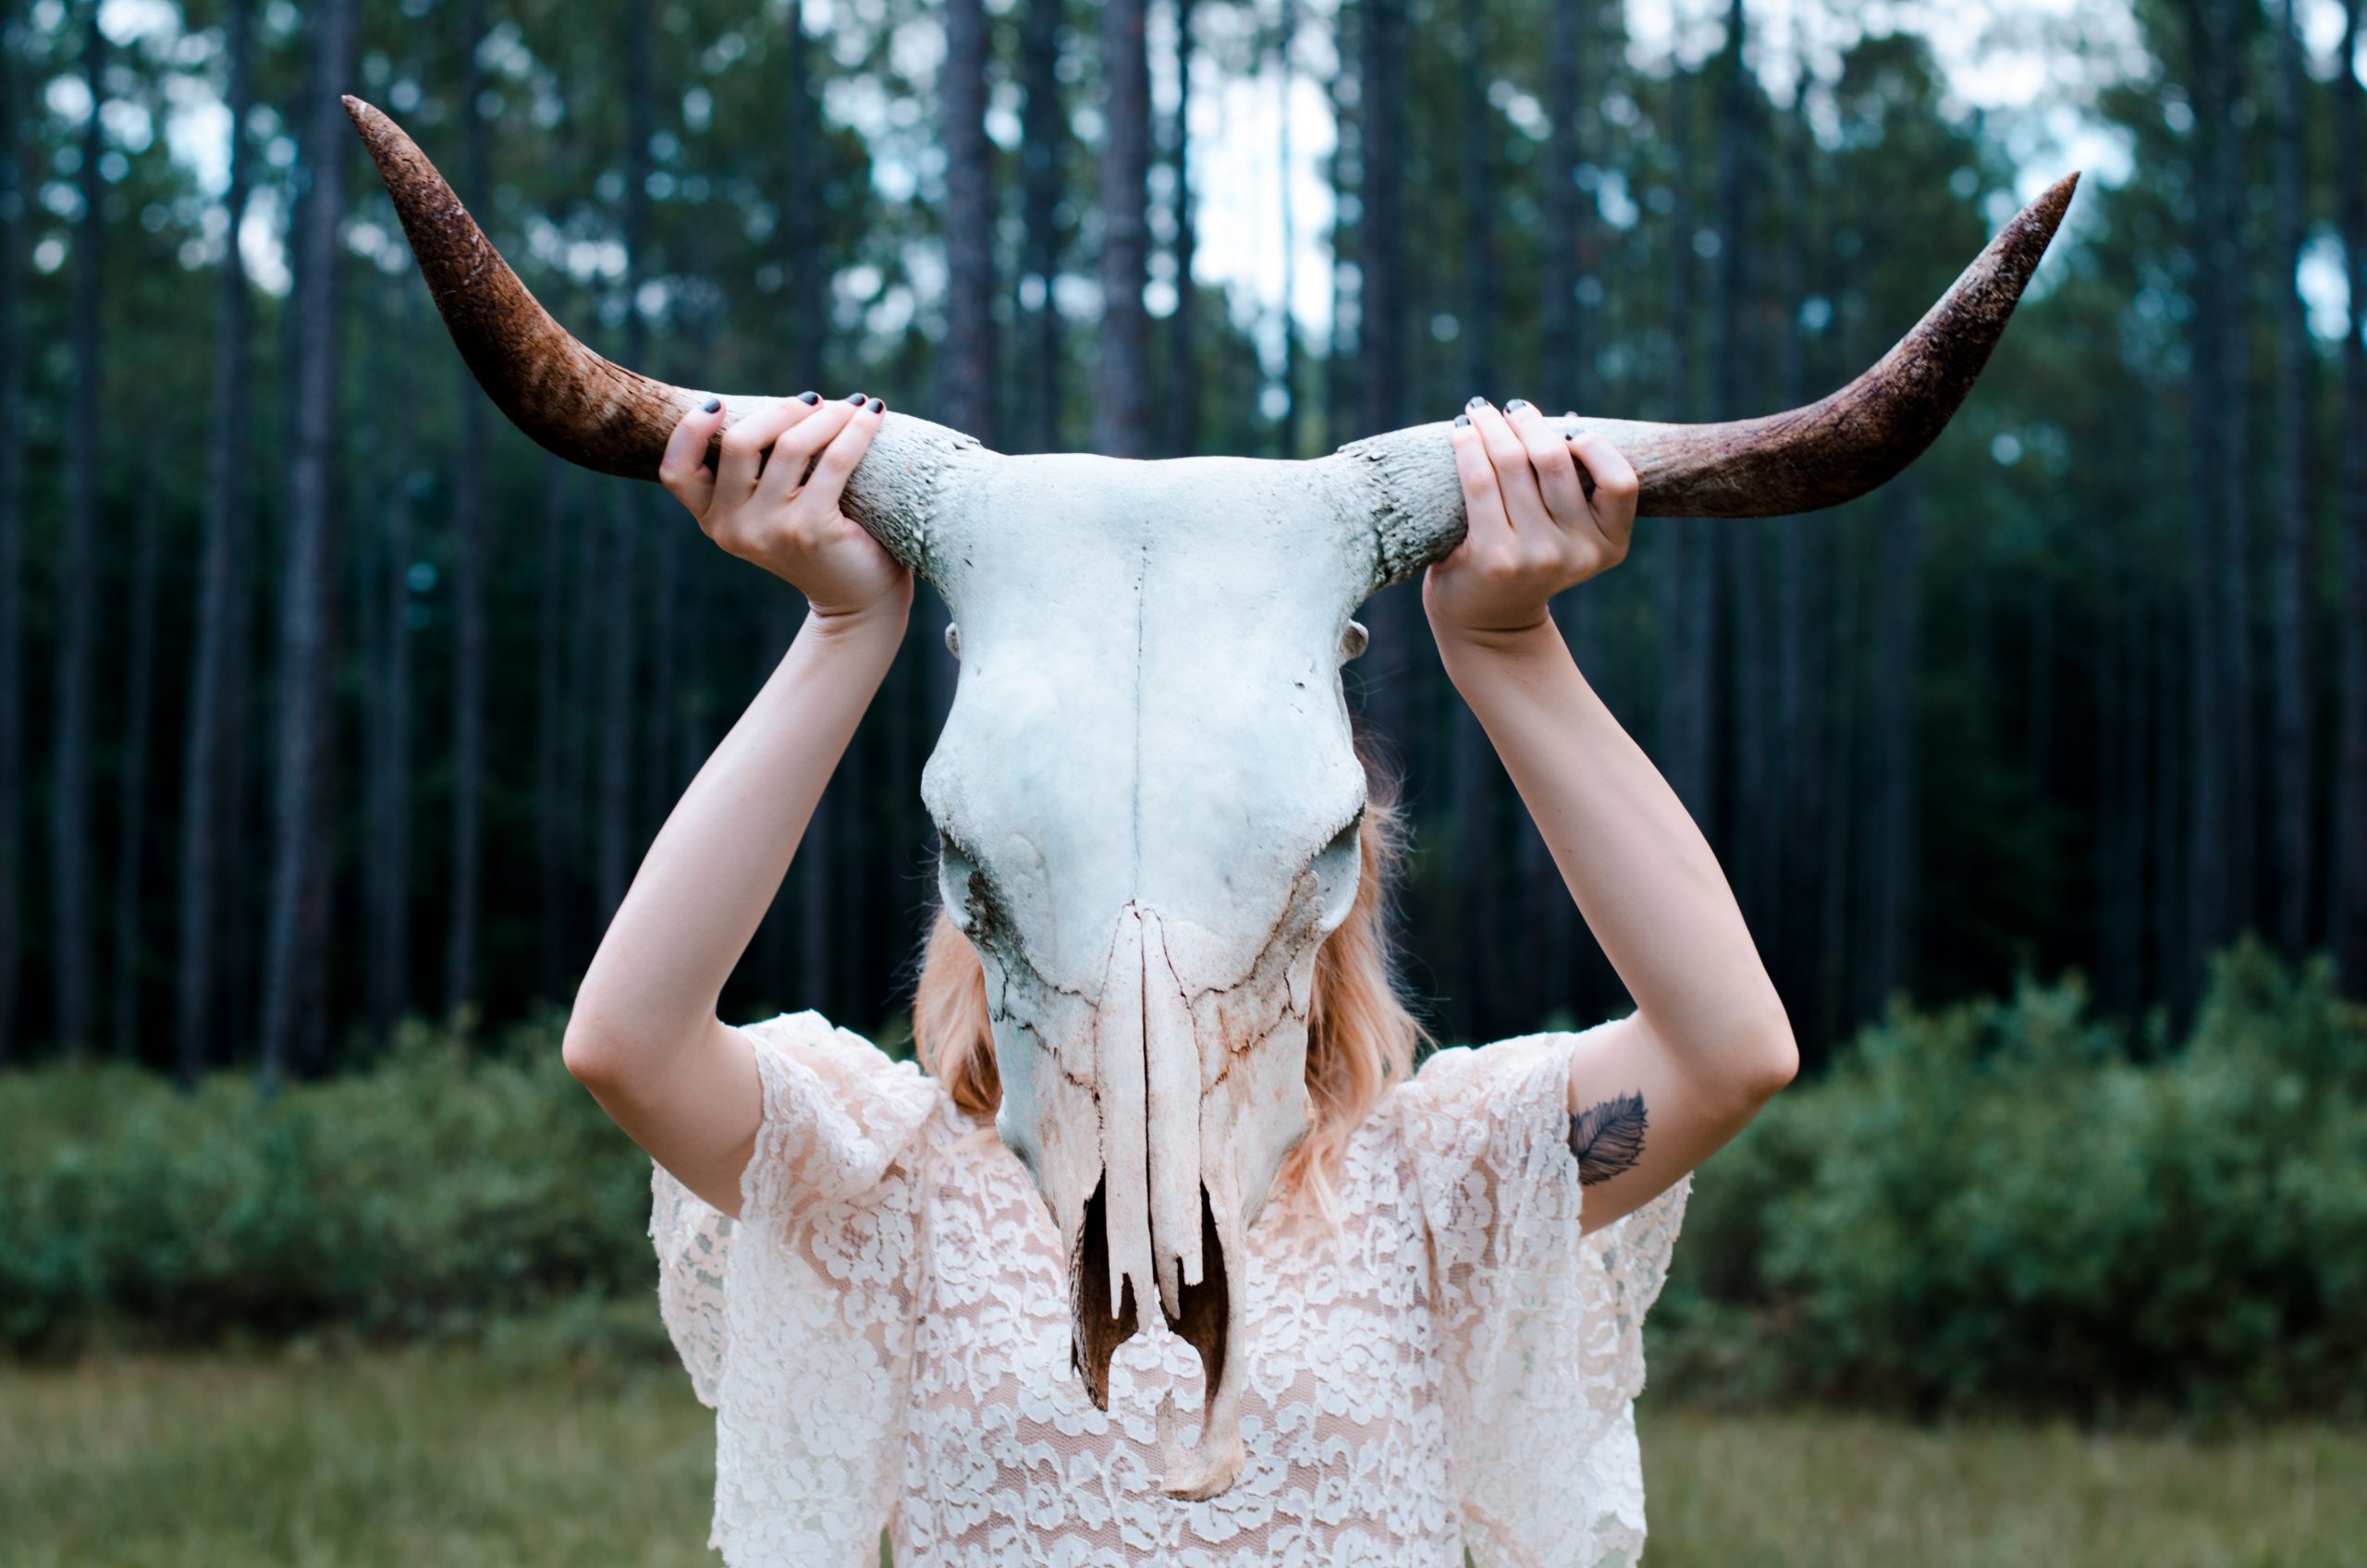 Astrology 101: What Can Your Zodiac Sign Teach You? Zodiac sign with dates; zodiac sign by month; zodiac sign personalities | Happy As Annie (Taurus, the Bull - Woman in lace dress holding up bull skull with antlers in front of her face in forest)